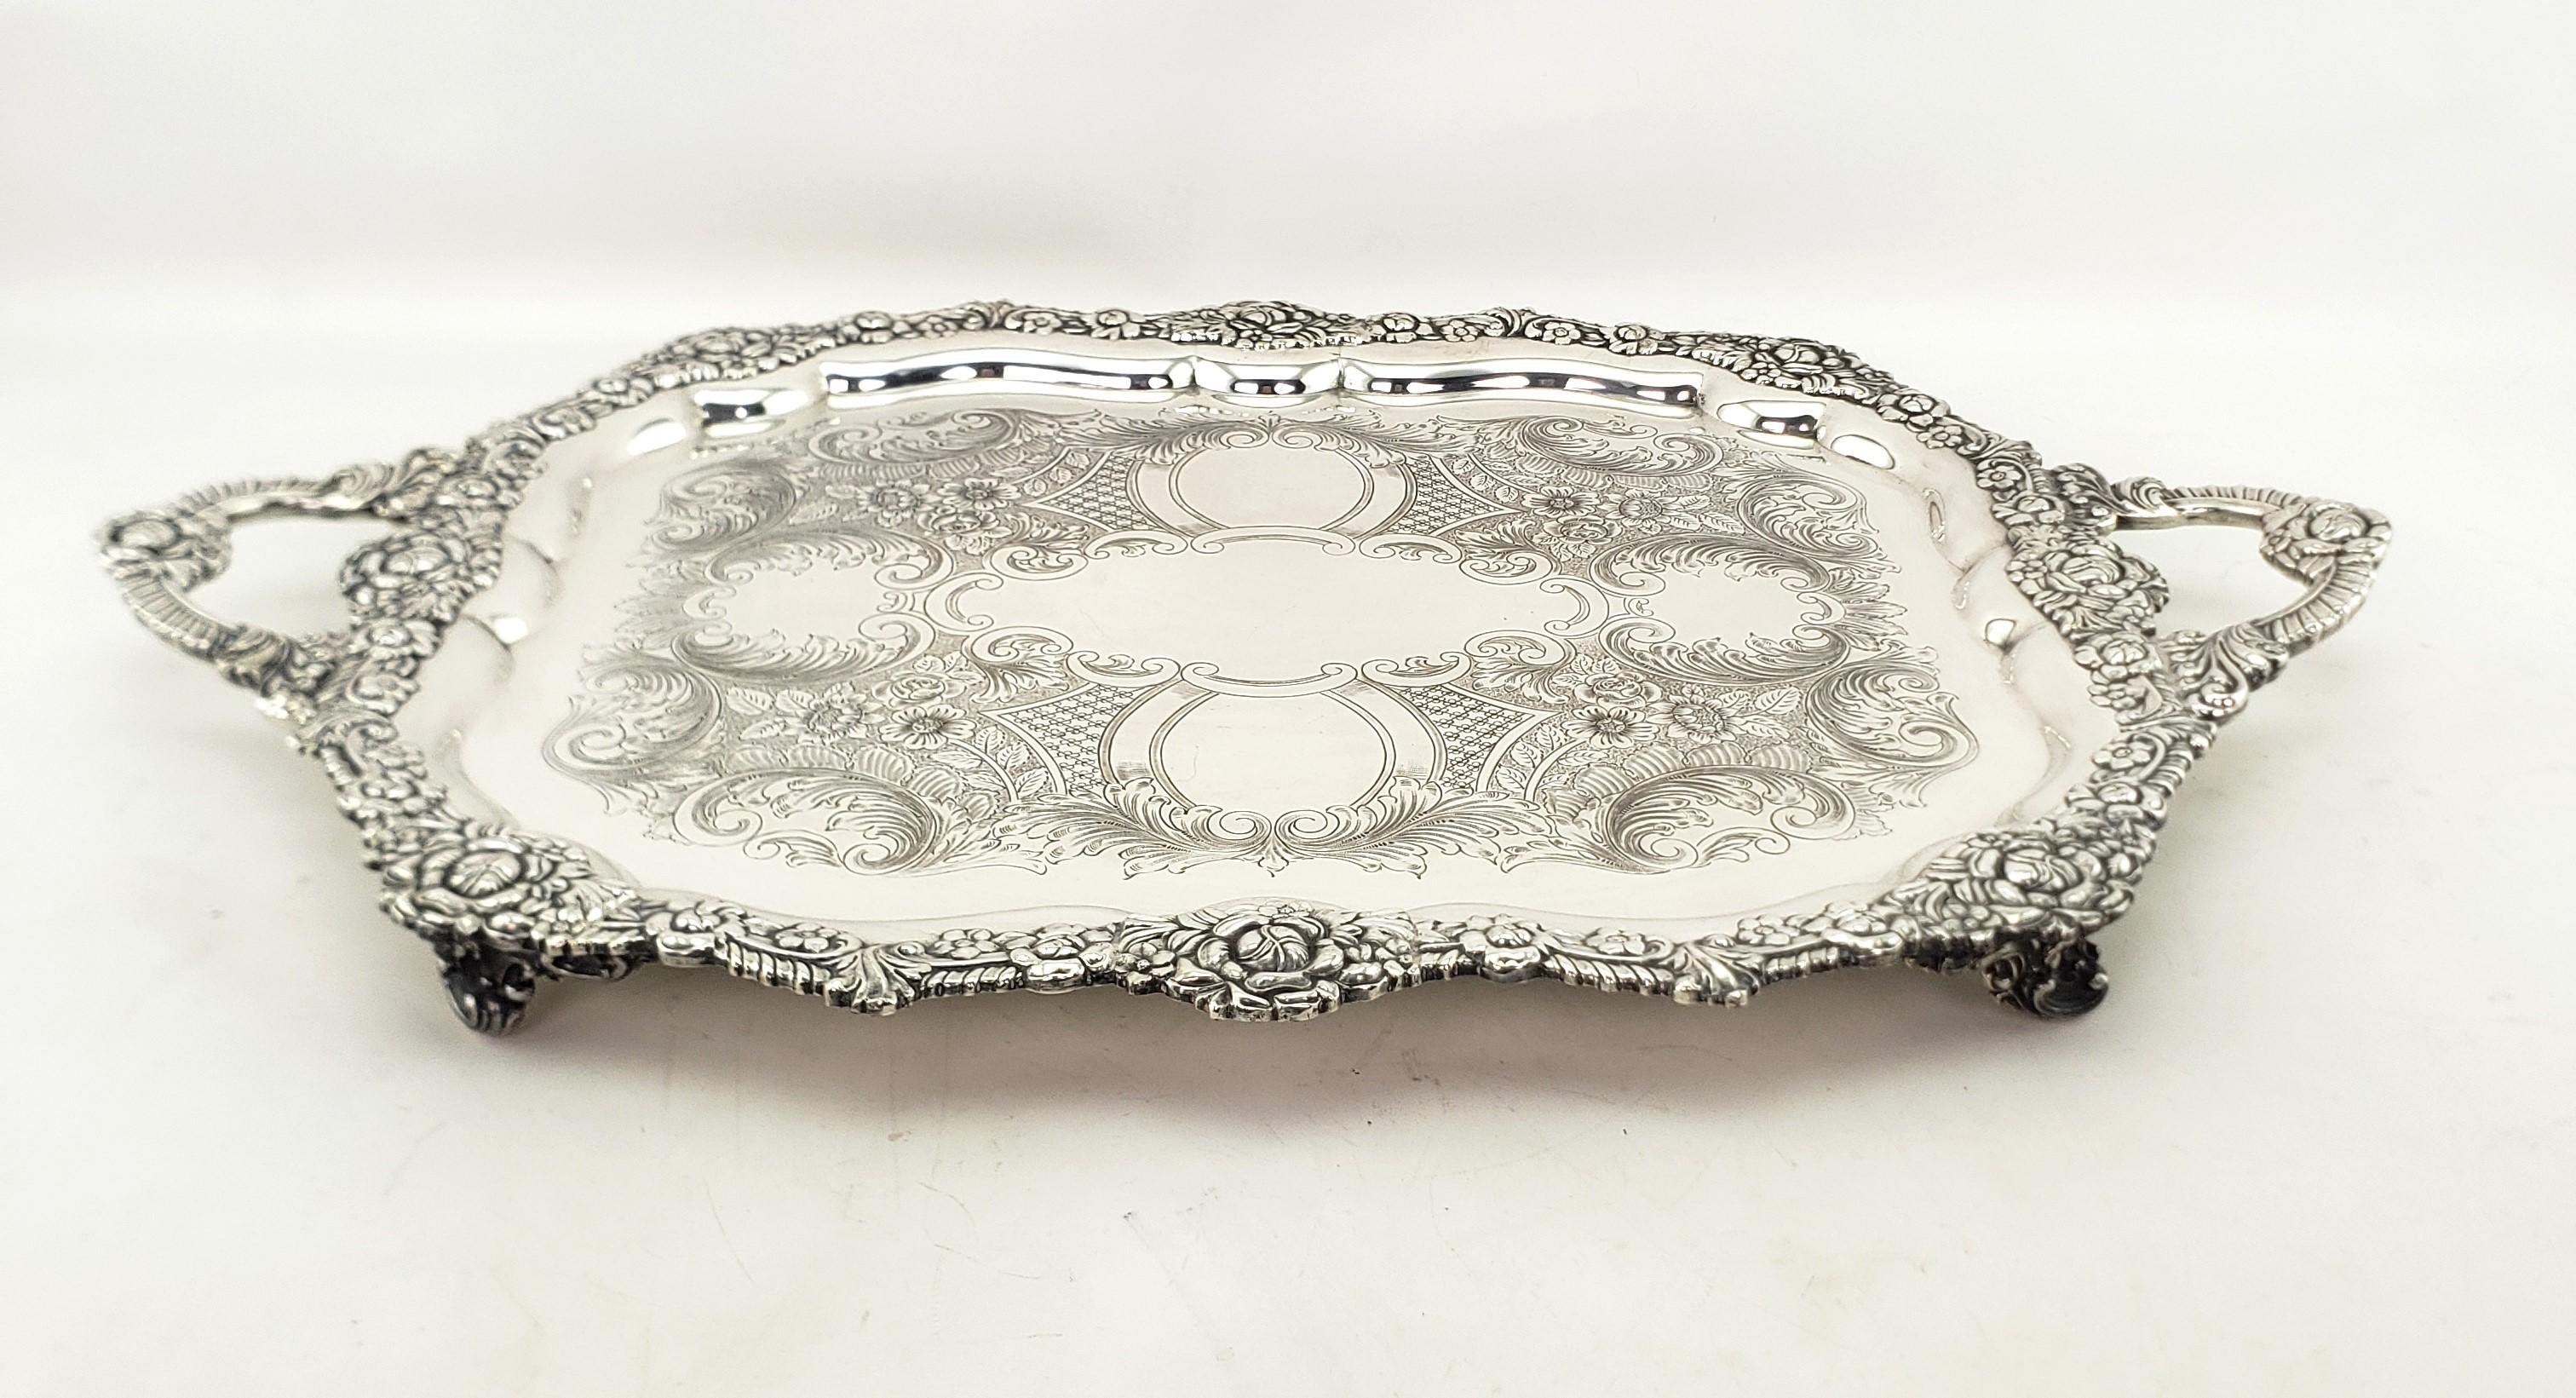 This very large and substantial antique footed serving tray is hallmarked by an unknown maker, but originated from England and dates to approximately 1880 and done in the period Victorian style. The tray is composed of silver plate and features an